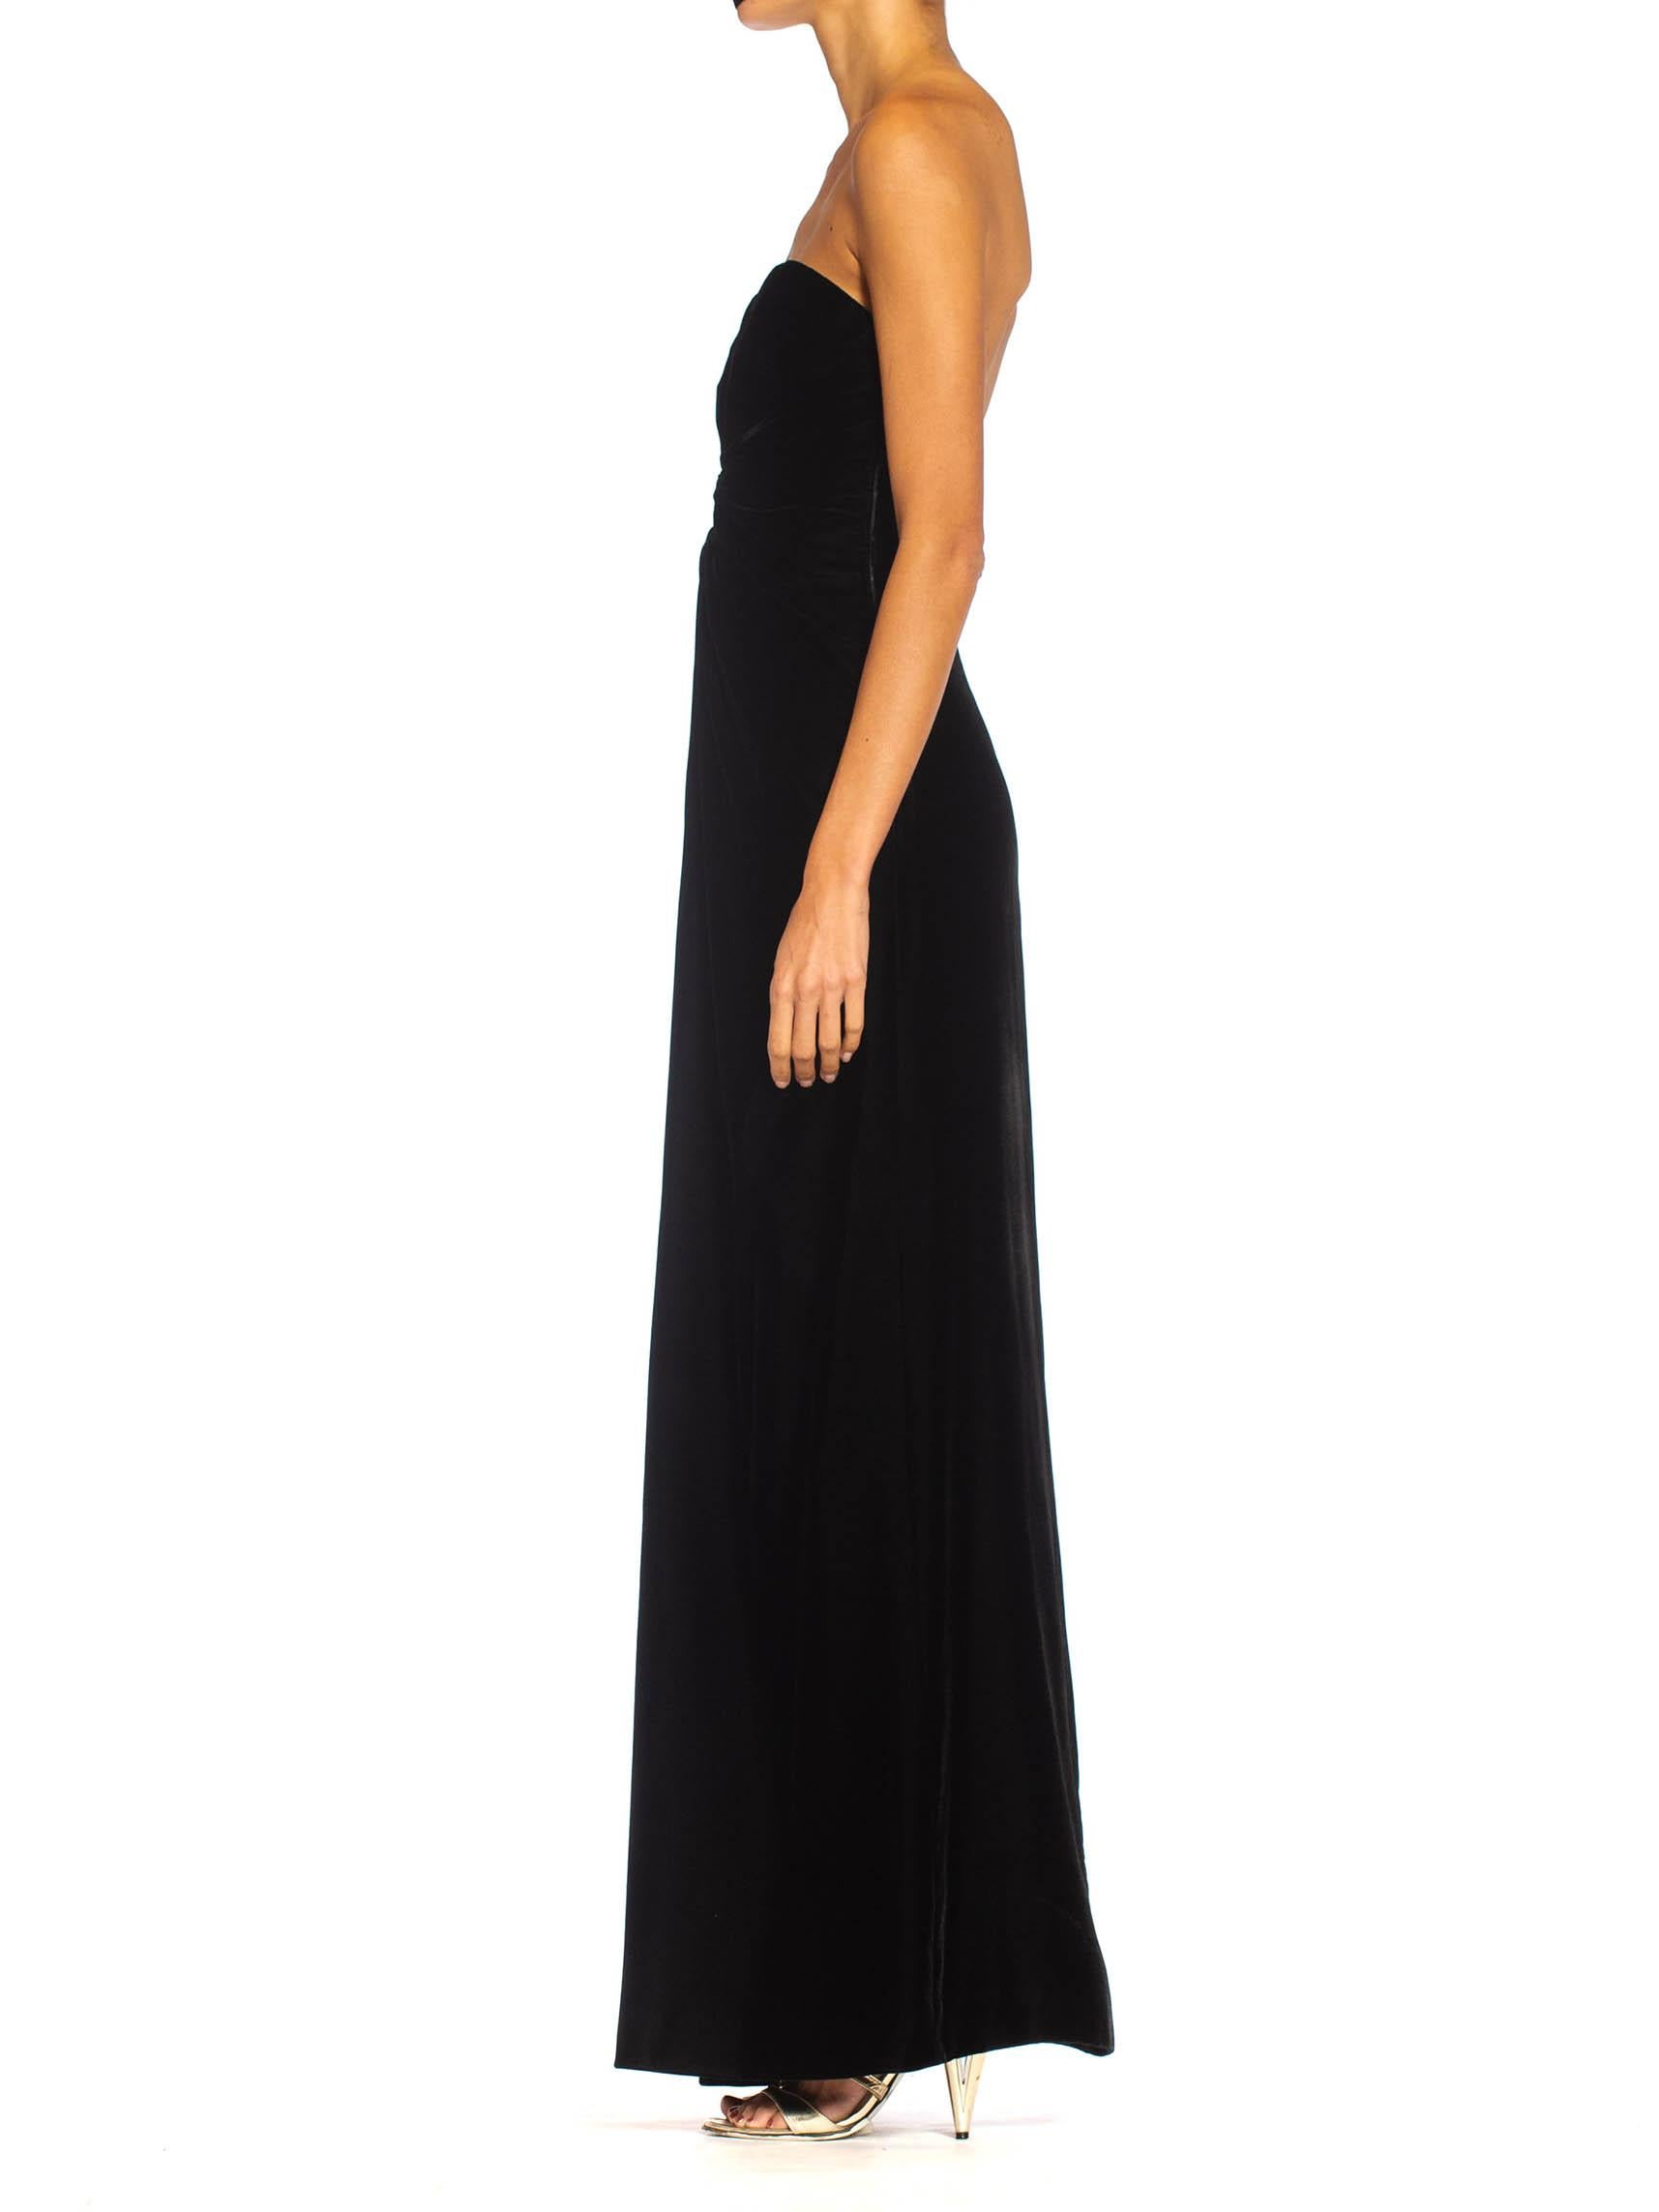 1980S YVES SAINT LAURENT Black Haute Couture Silk Velvet Strapless Gown In Excellent Condition For Sale In New York, NY